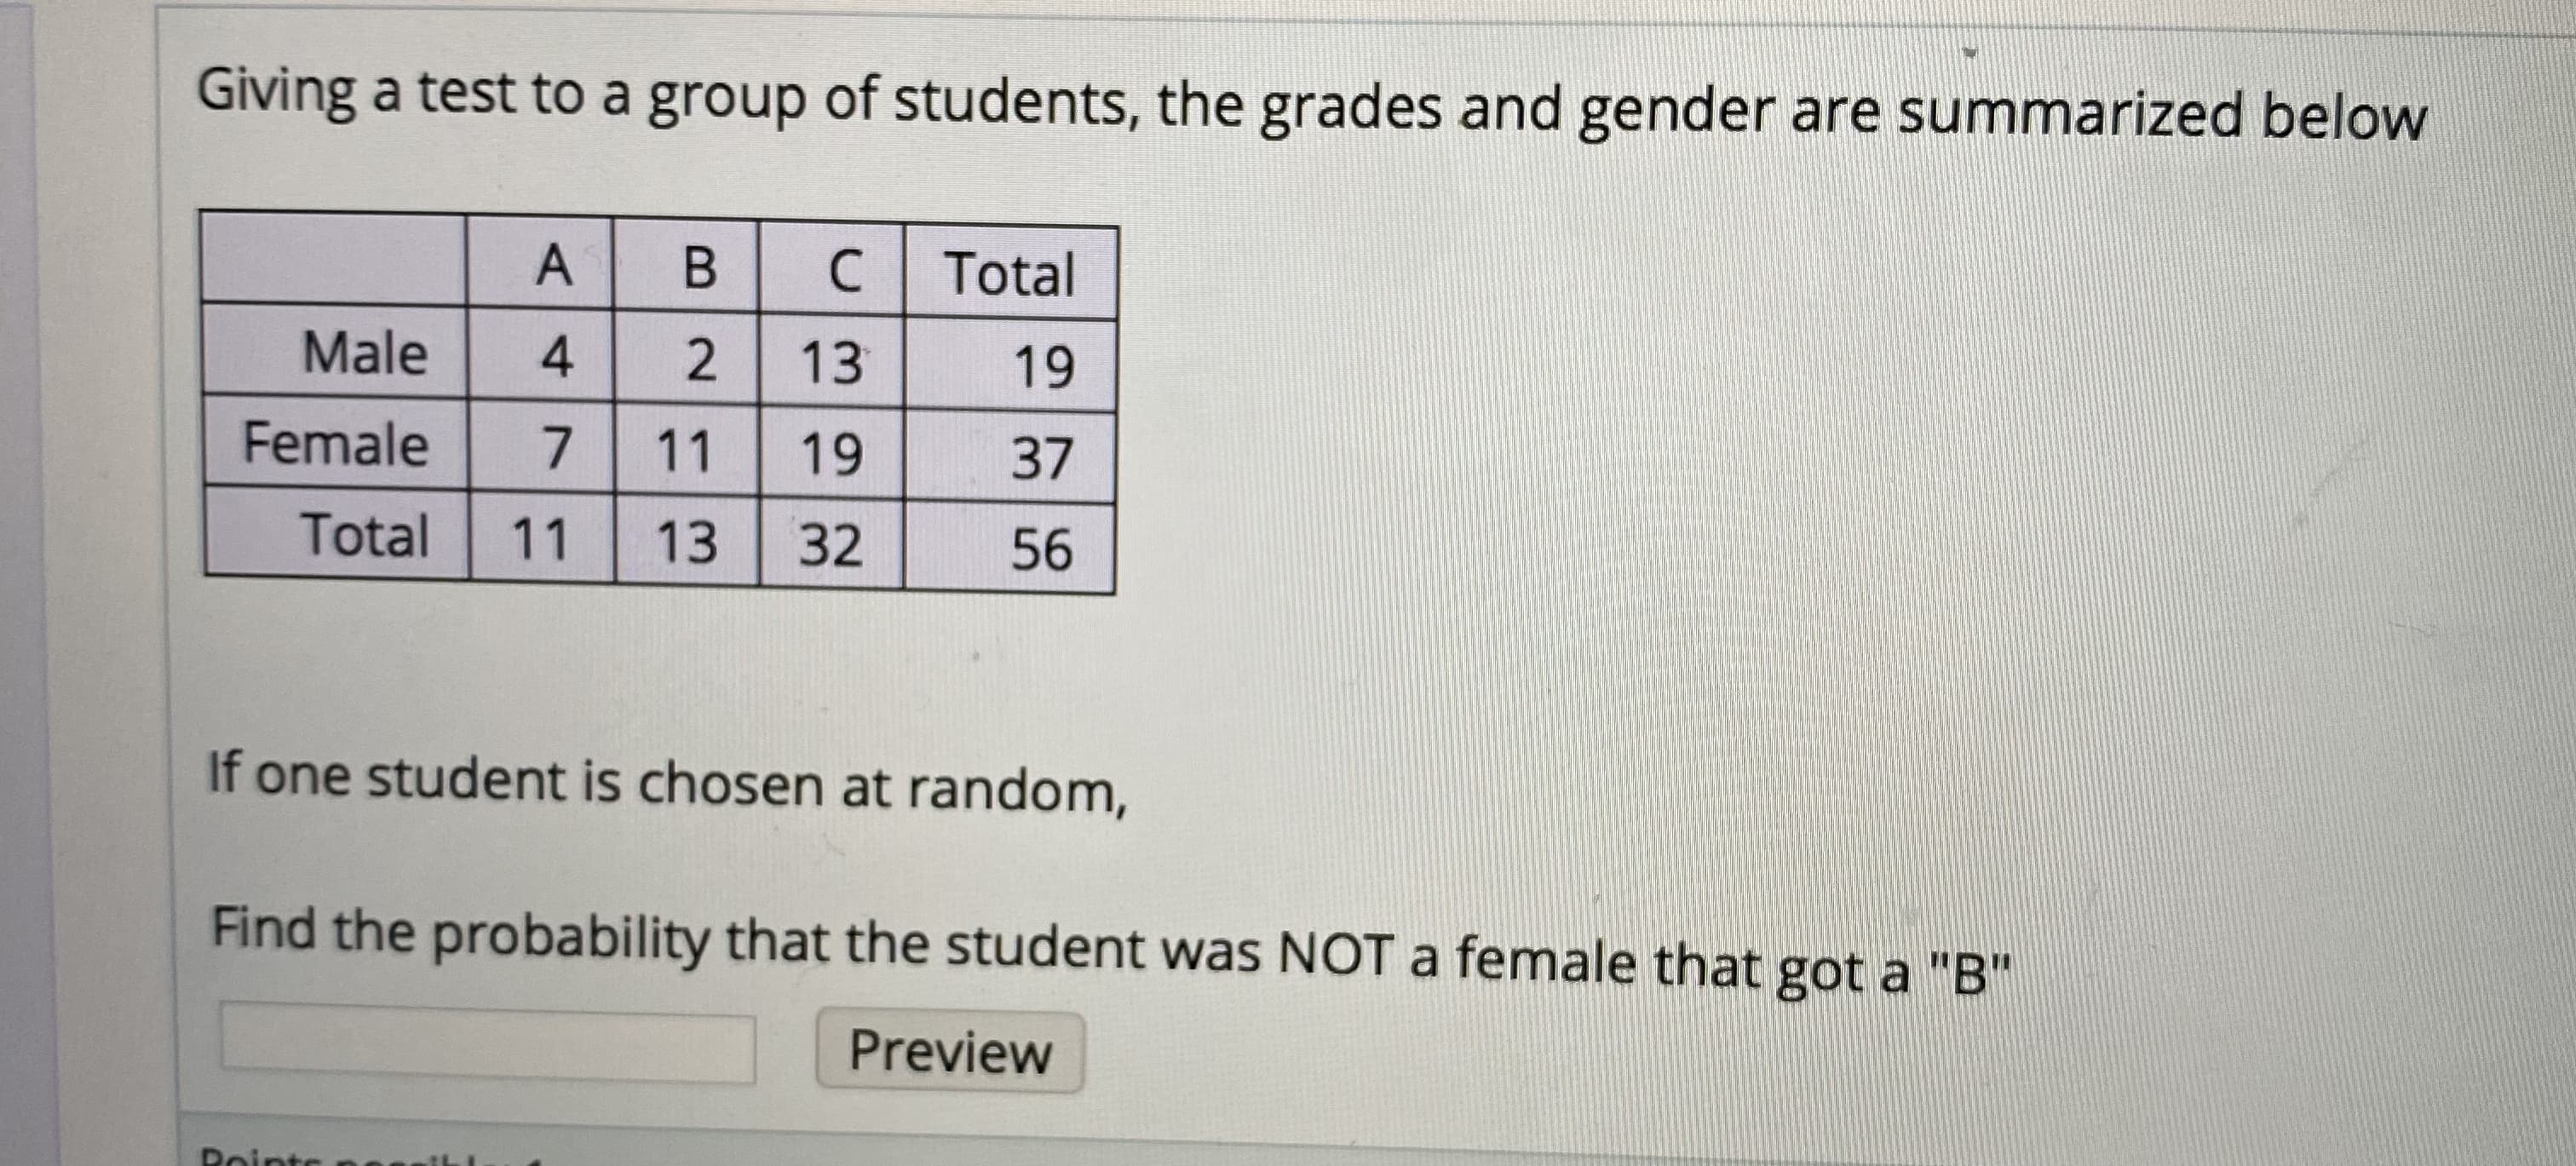 Giving a test to a group of students, the grades and gender are summarized below
Total
Male
4.
13
19
Female
11
19
37
Total
11
13
32
56
If one student is chosen at random,
Find the probability that the student was NOT a female that got a "B"
Preview
Roints
2.
